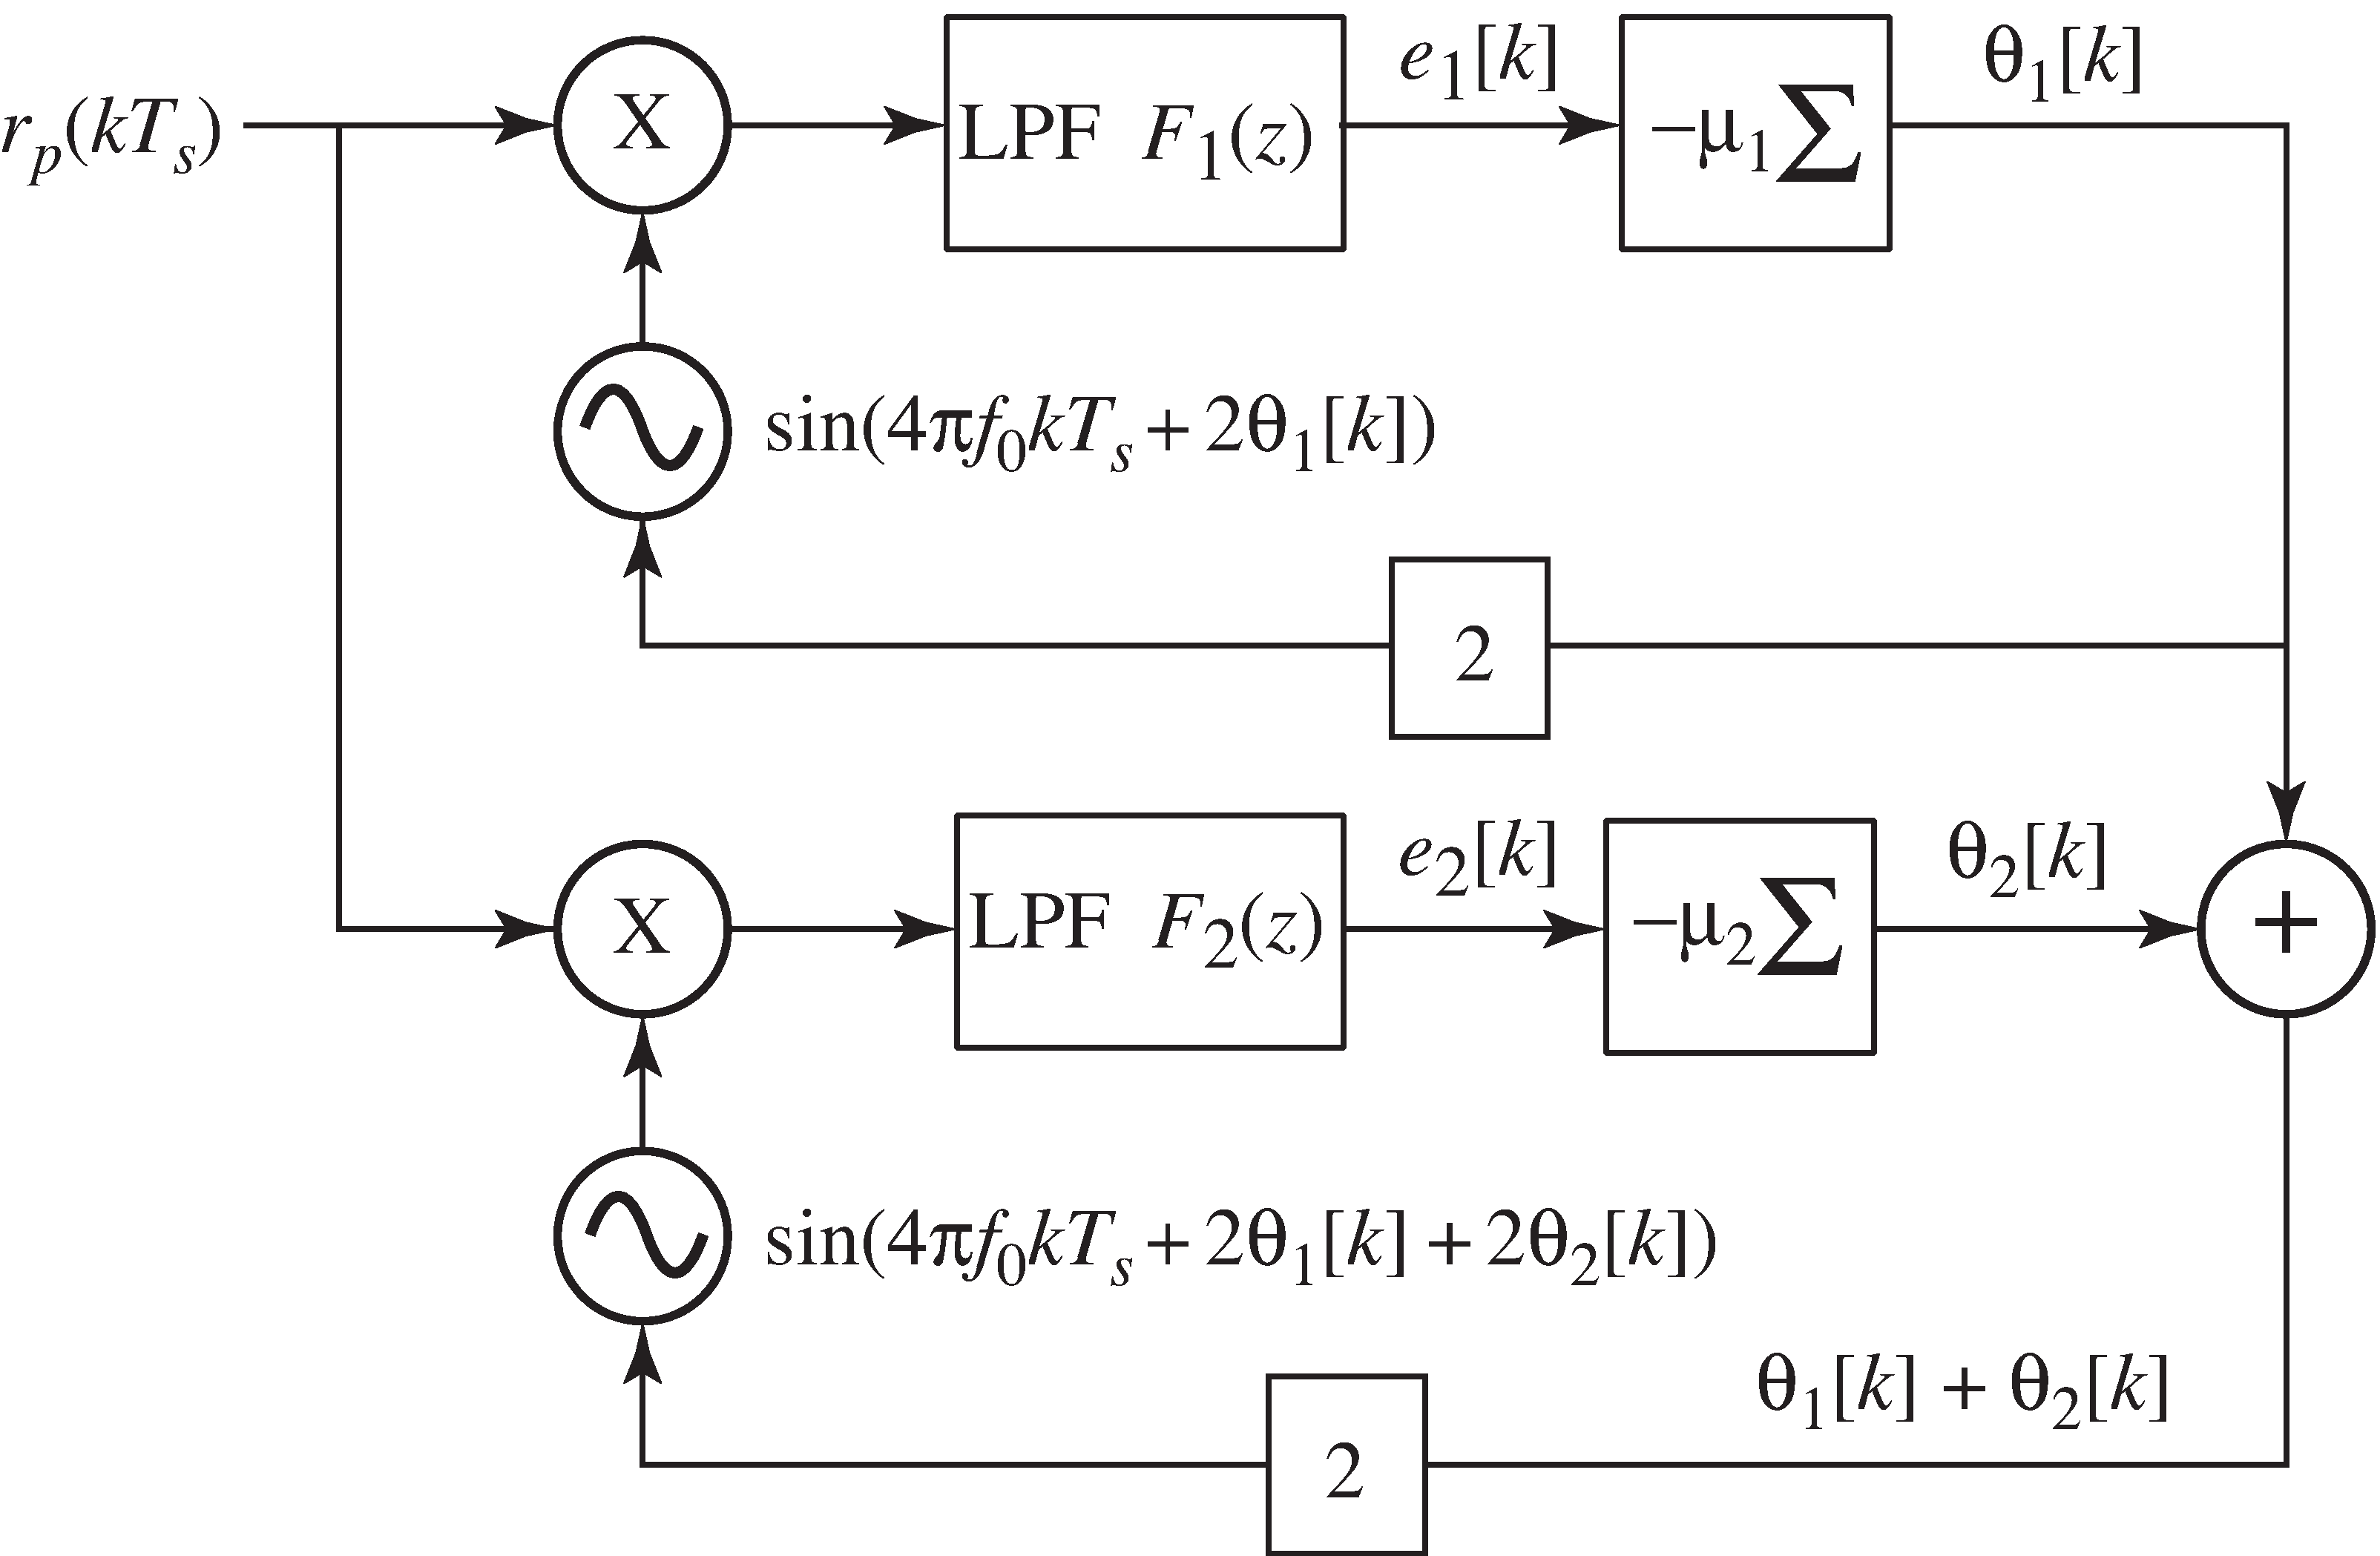 A pair of PLLs can efficiently estimate the frequency offset at the receiver. The parameter θ_1 in the top loop “converges to” a slope that corrects the frequency offset and the parameter θ_2 in the bottom loop corrects the residual phase offset. The sum θ_1+θ_2 is used to drive the sinusoid in the carrier recovery scheme.